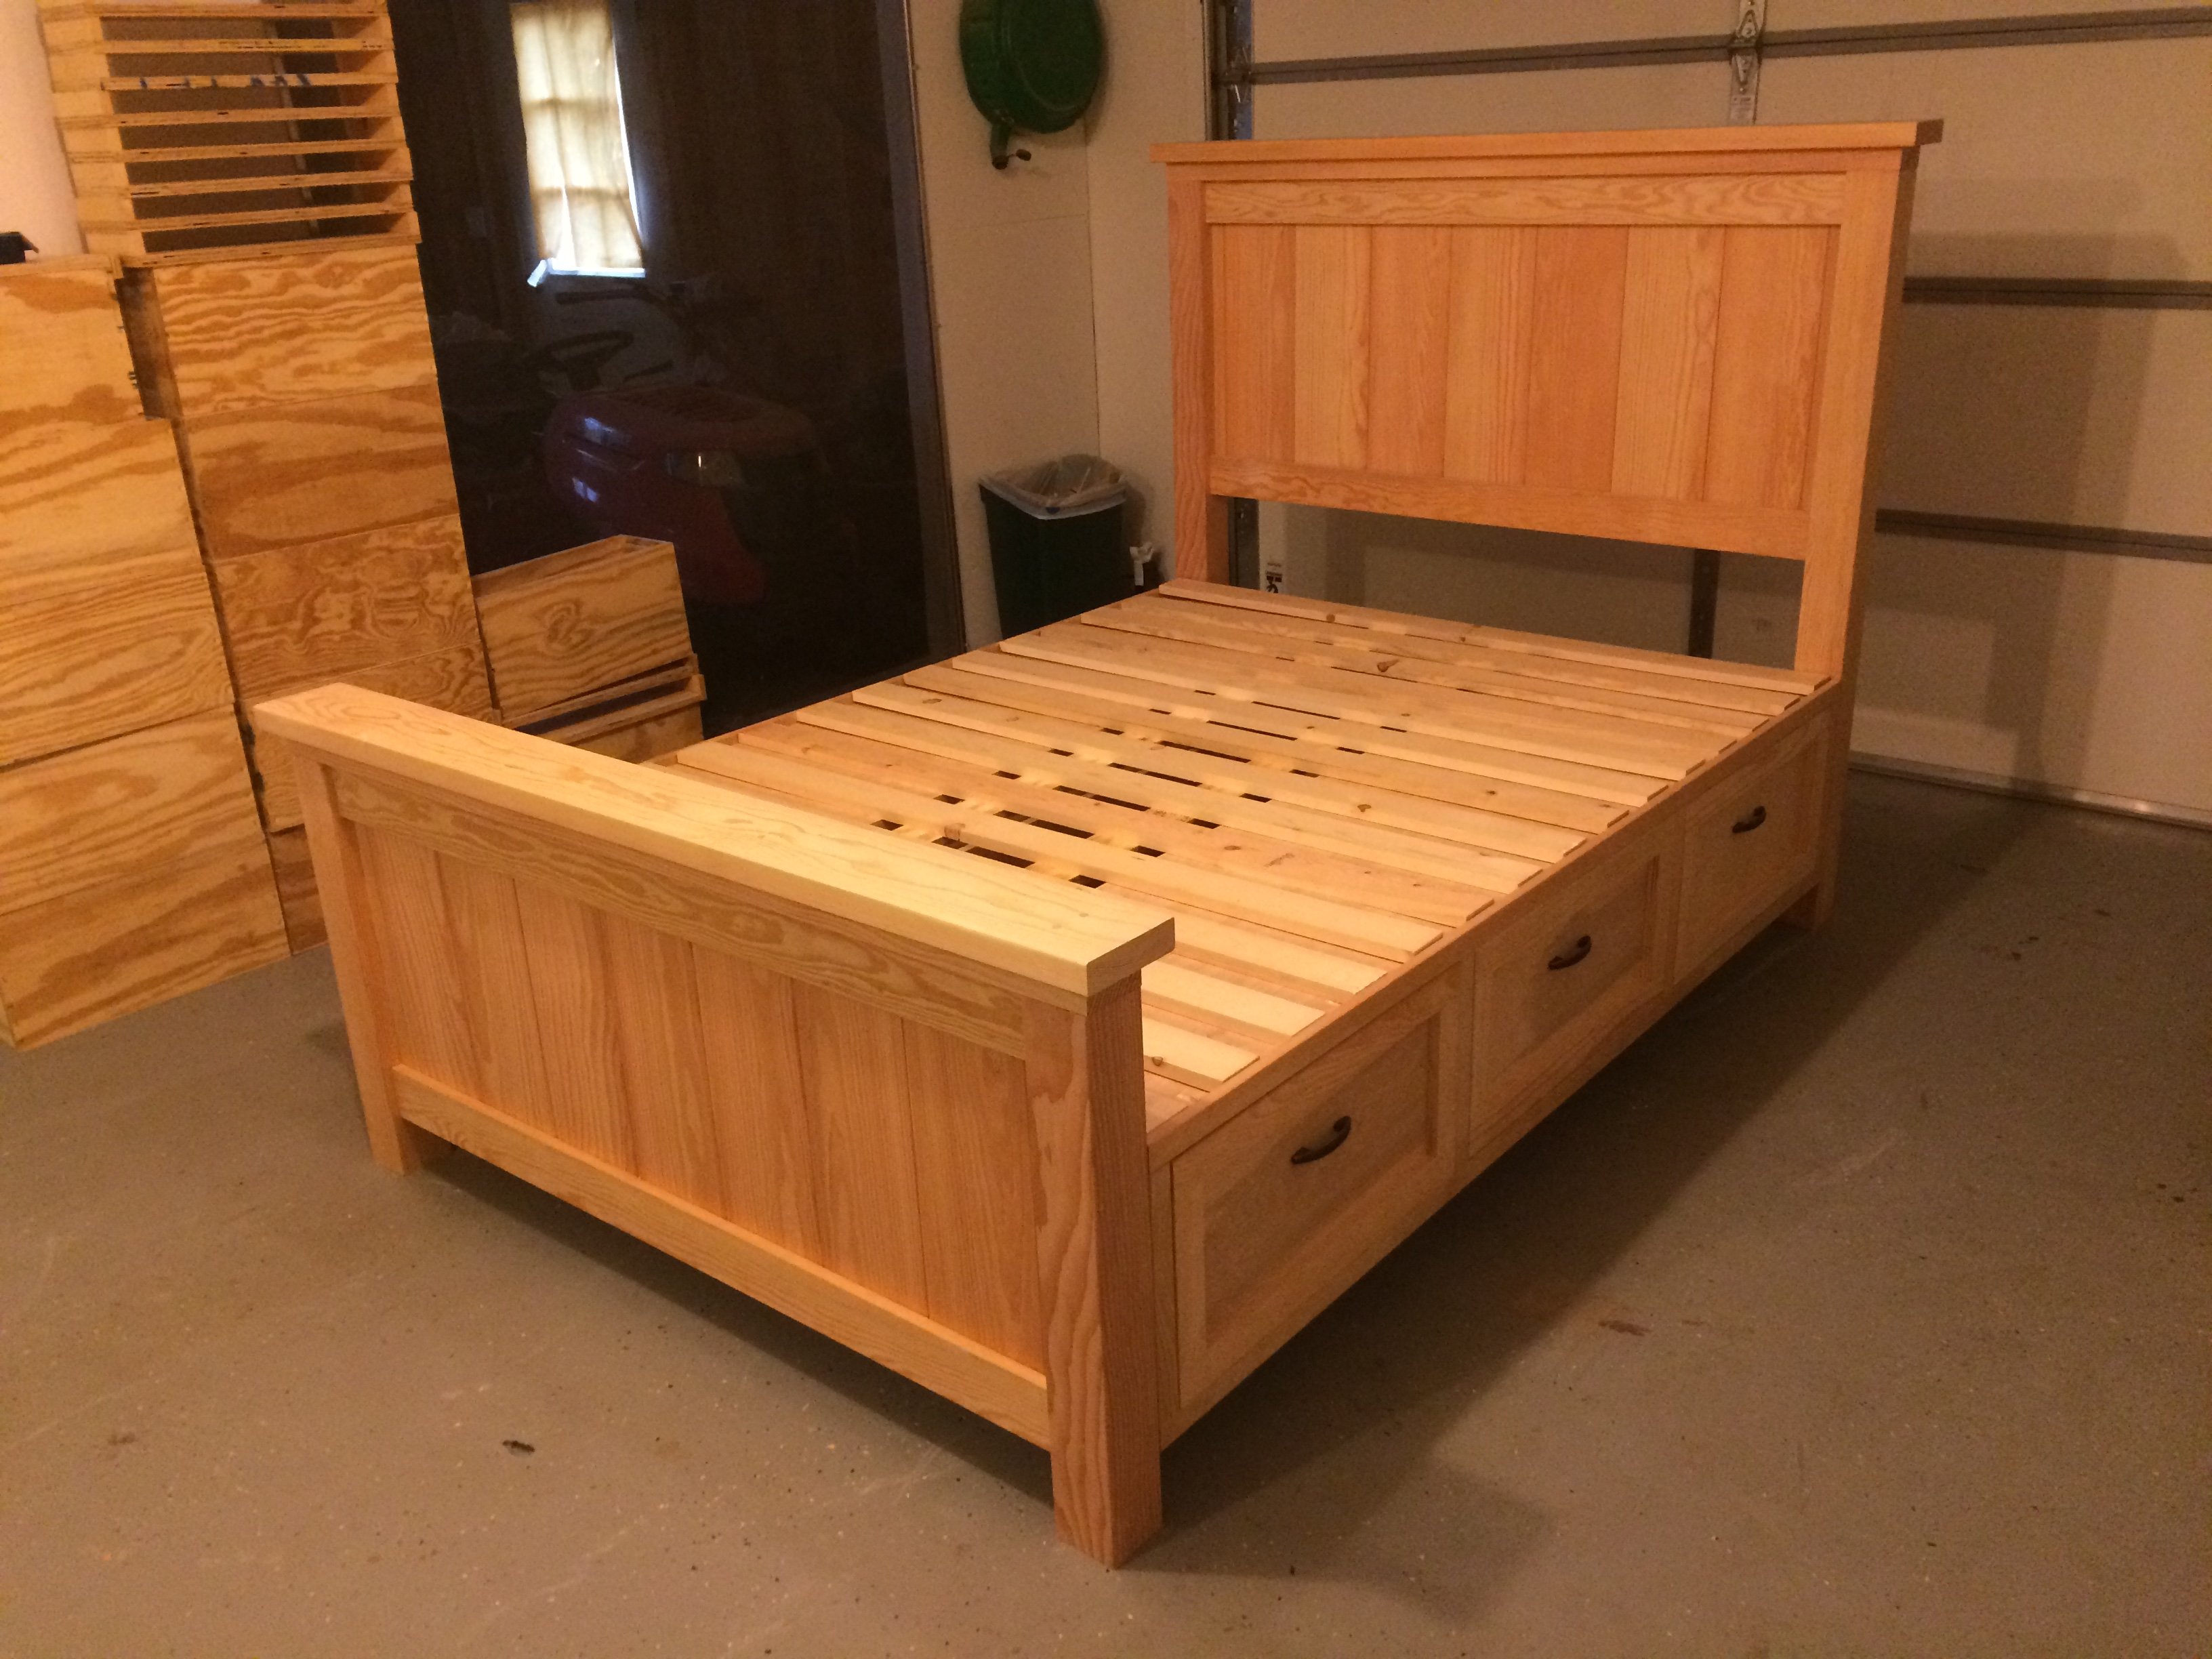 Farmhouse Storage Bed With Drawers, Free King Size Bed Frame Plans With Storage